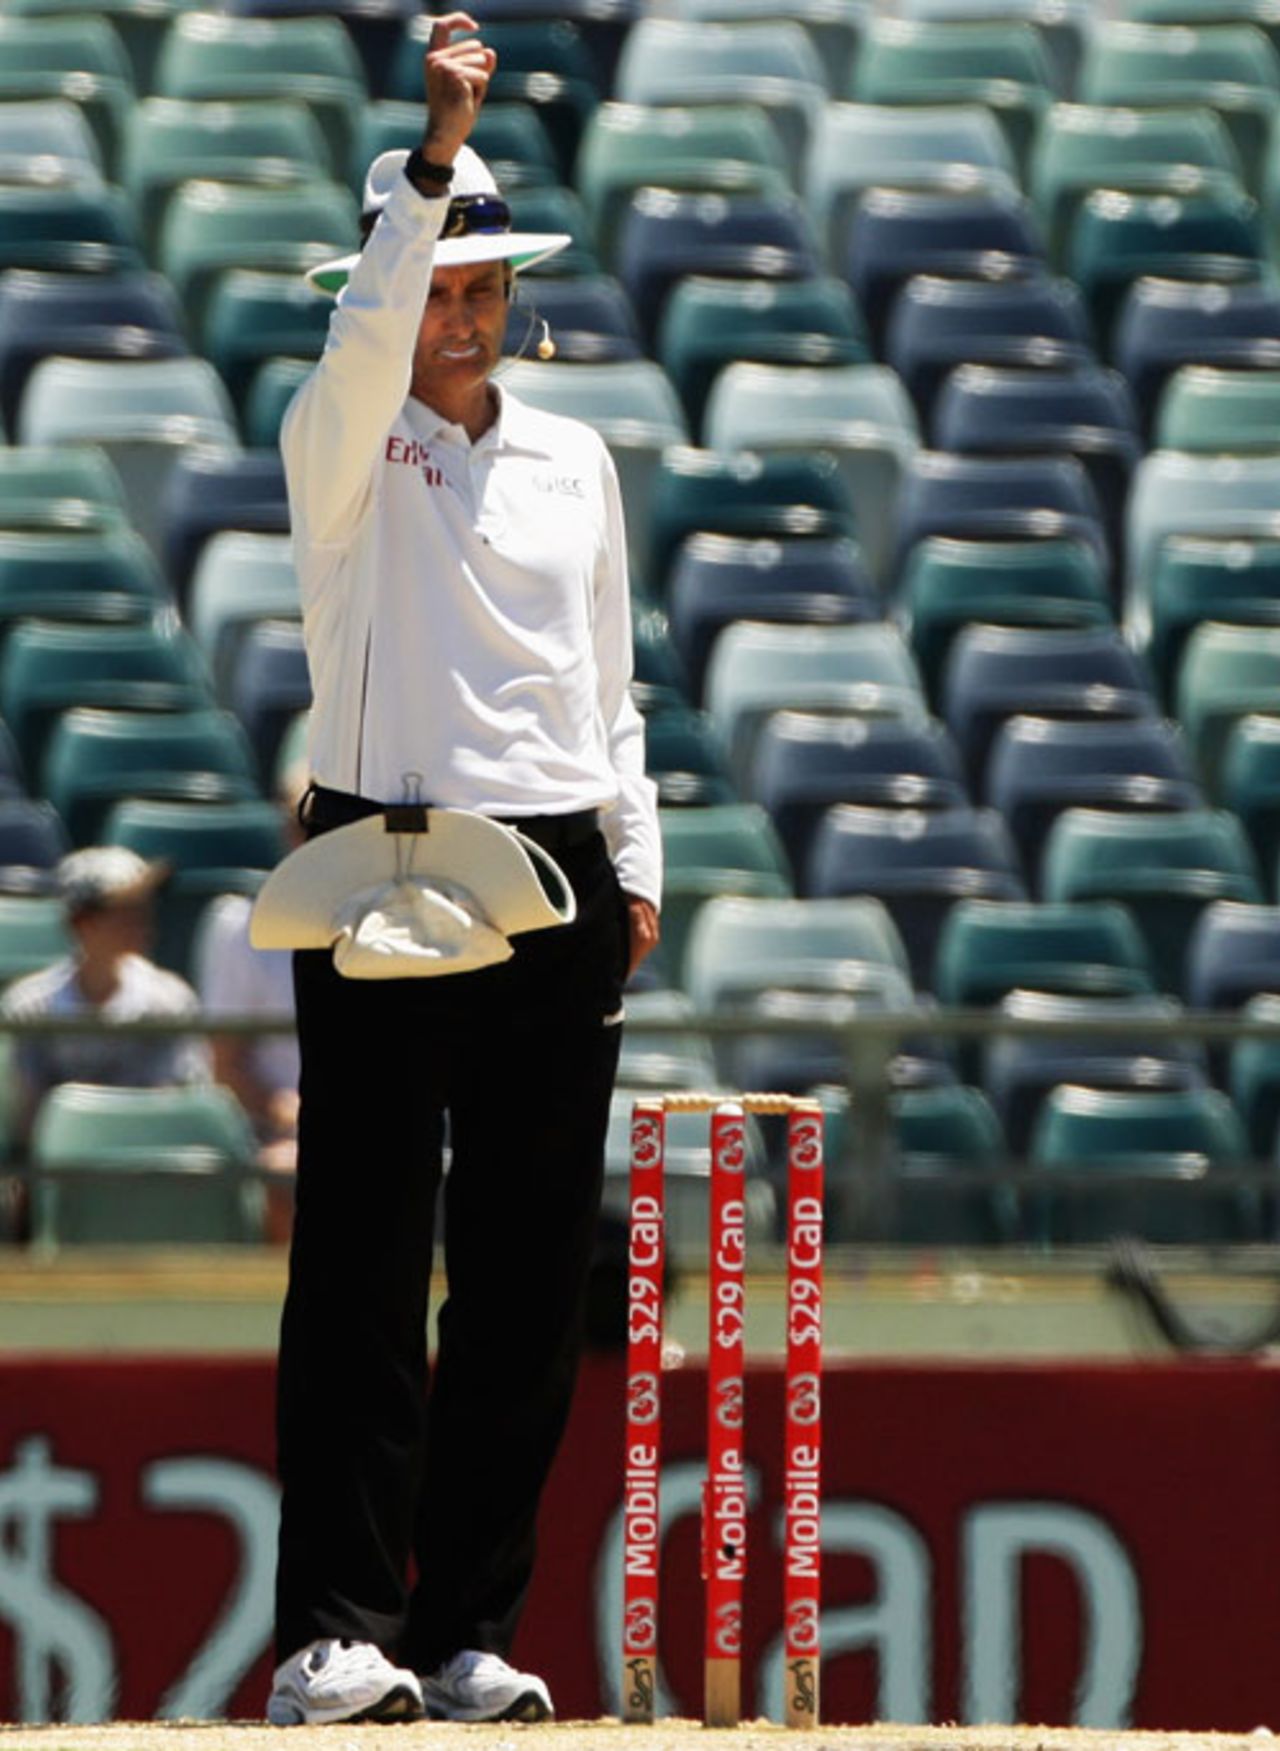 Billy Bowden raises his finger for the second time to give out Kemar Roach, Australia v West Indies, 3rd Test, Perth, December 20, 2009